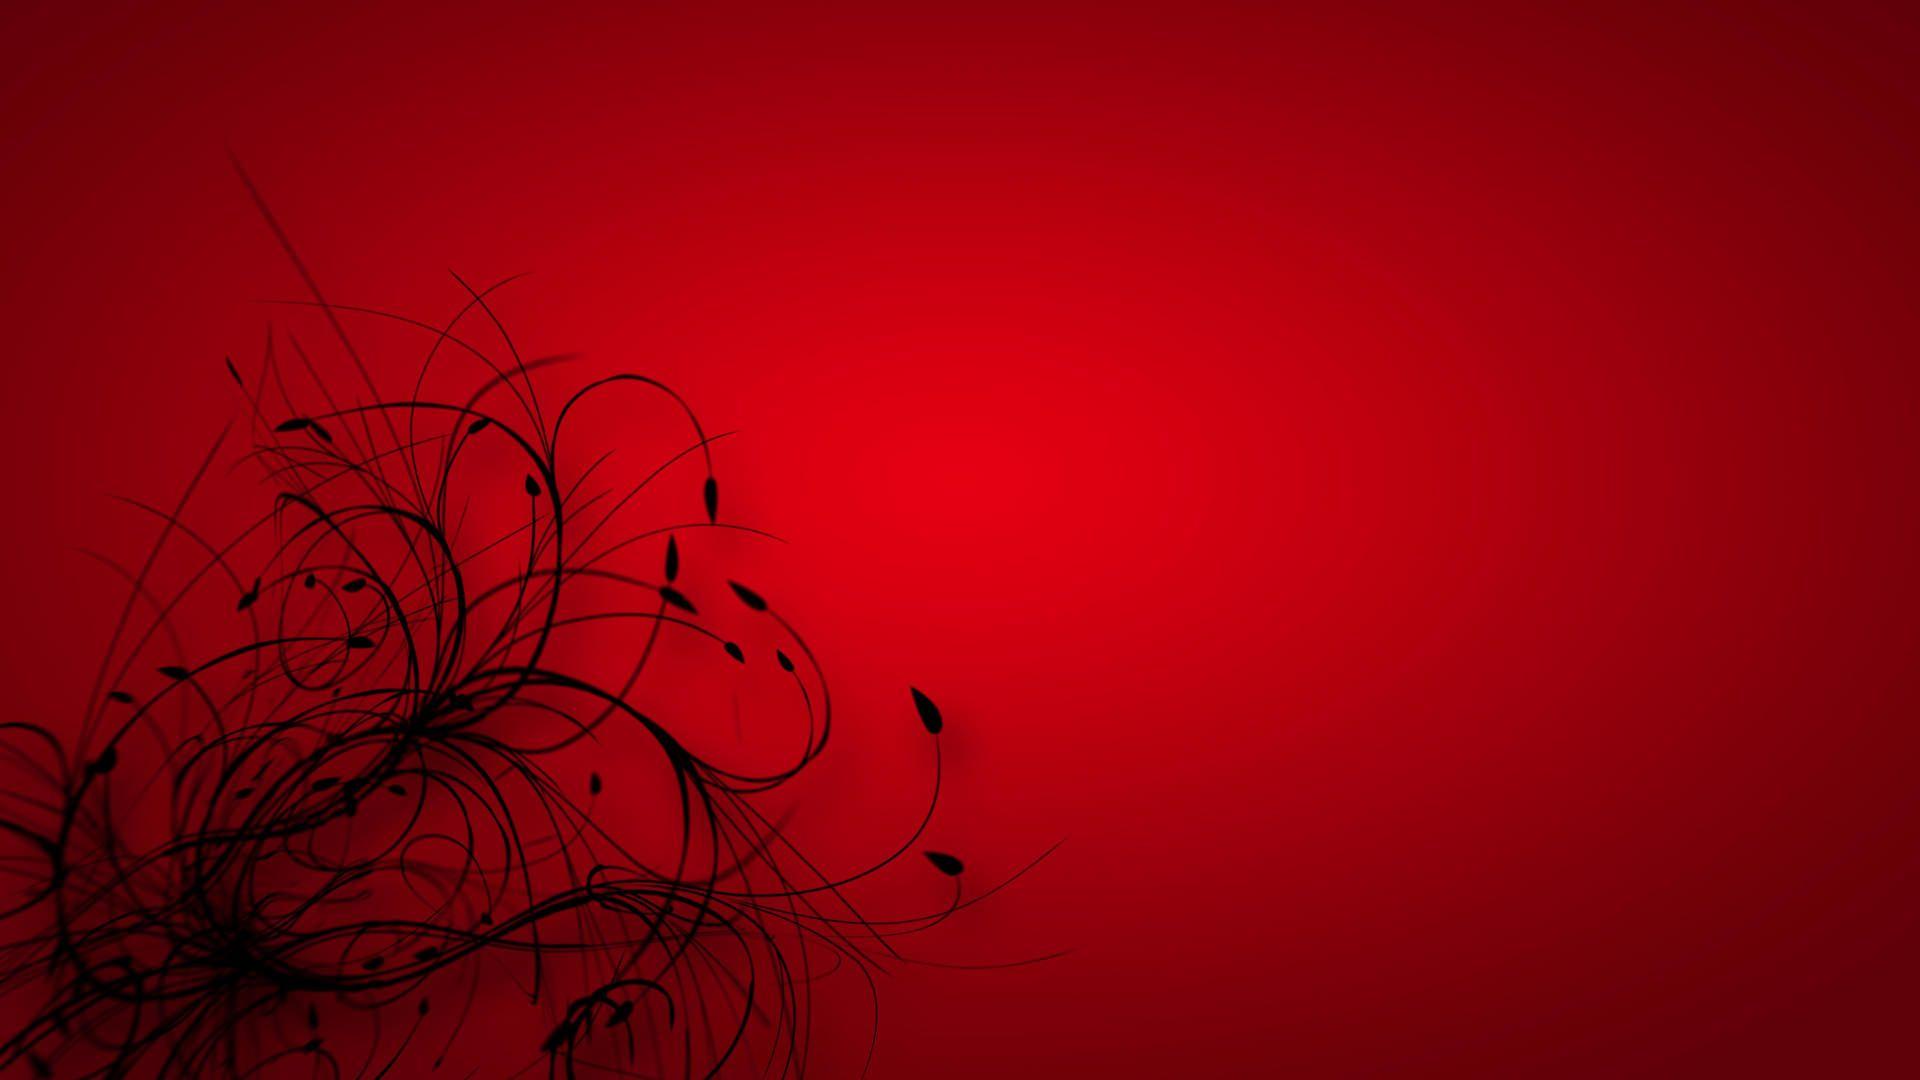 1920x1080 Red & Black Wallpaper, Background, Image